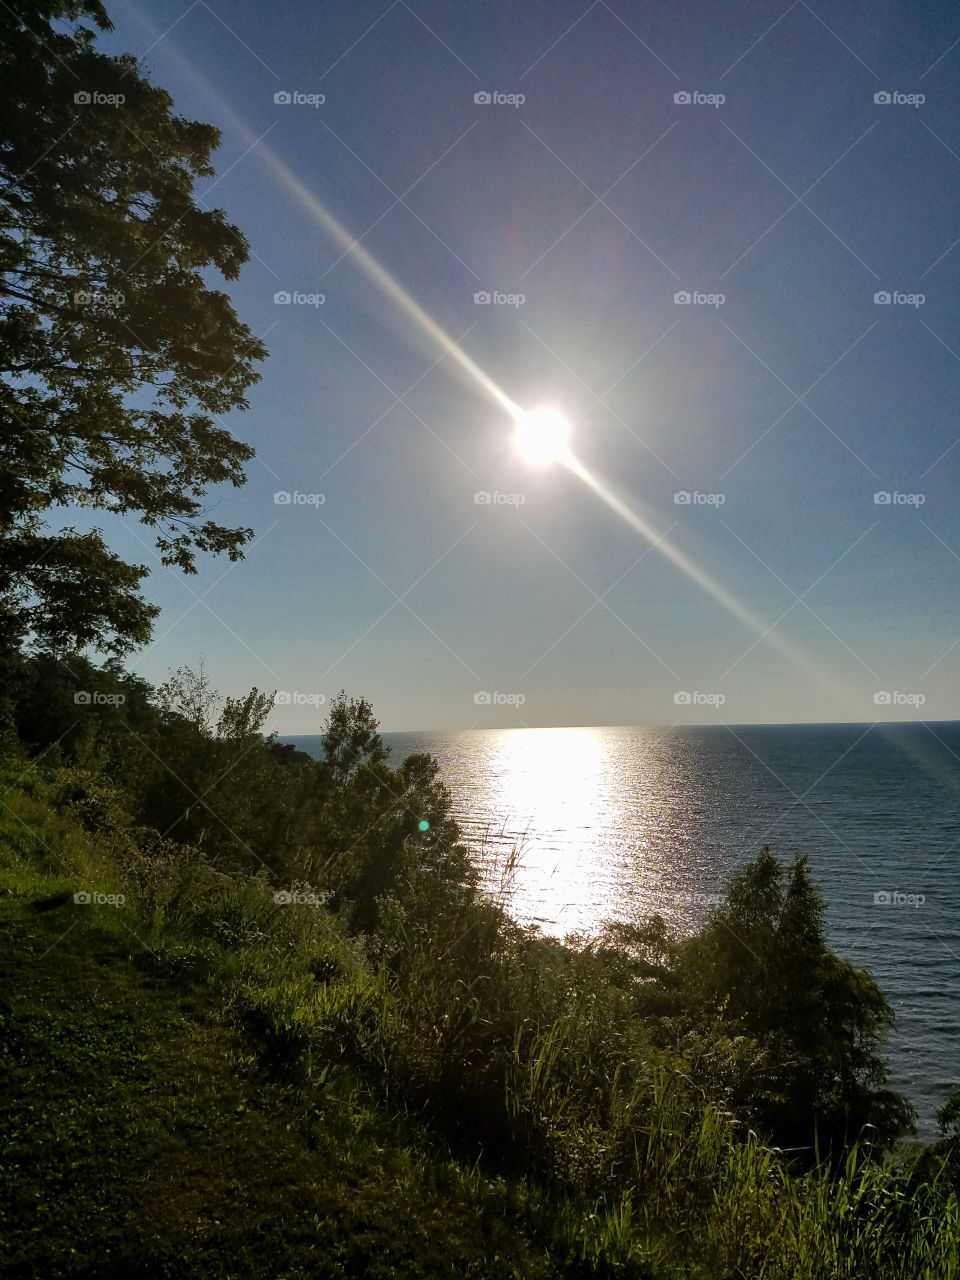 The sunlight reflects on the lake water